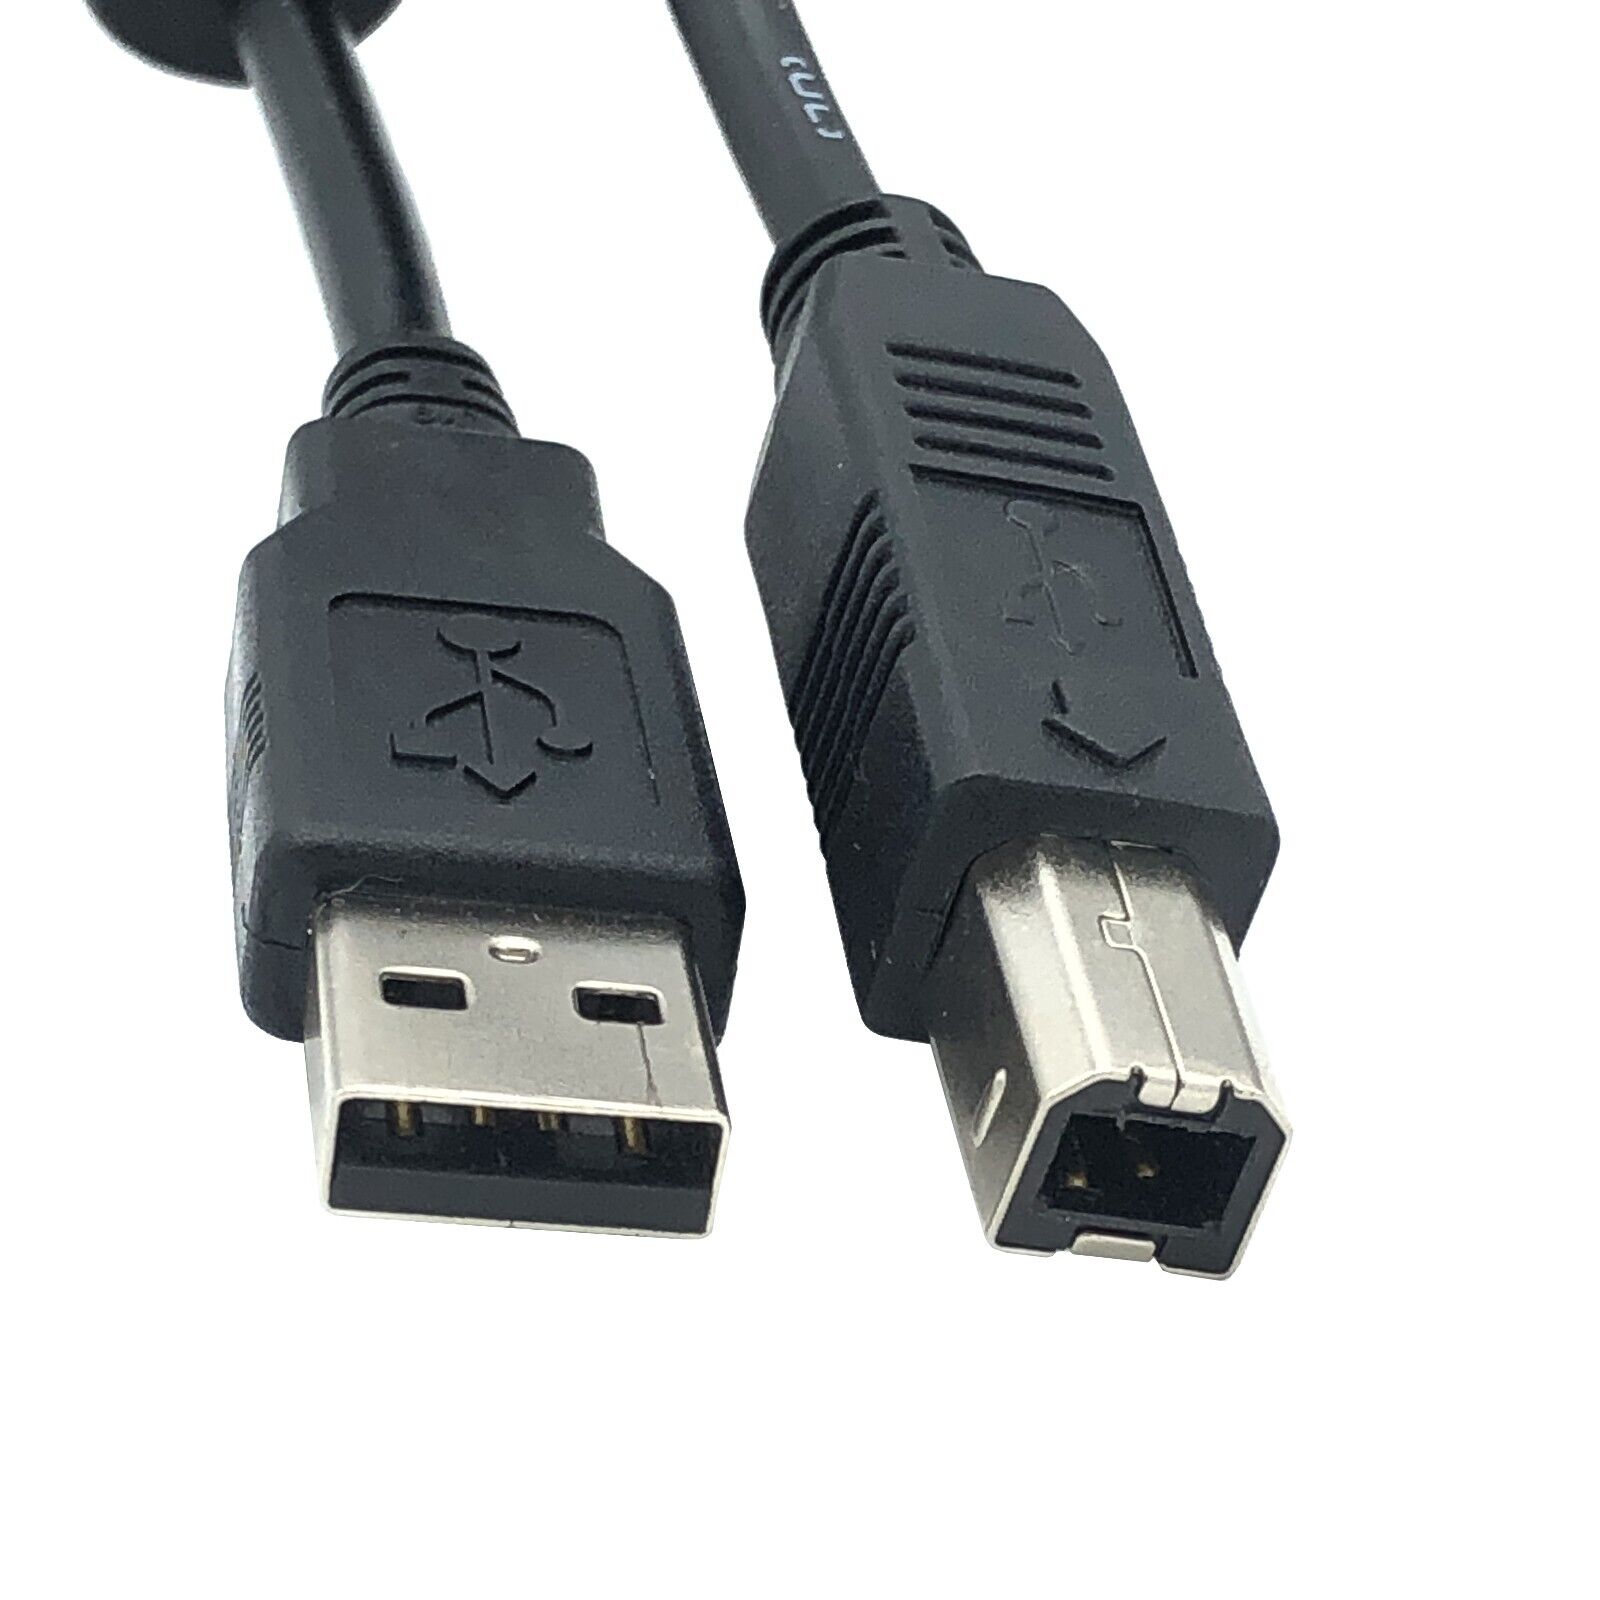 USB 2.0 A to B Cable Native Instruments Komplete Audio 1 2 6 USB Audio Interface